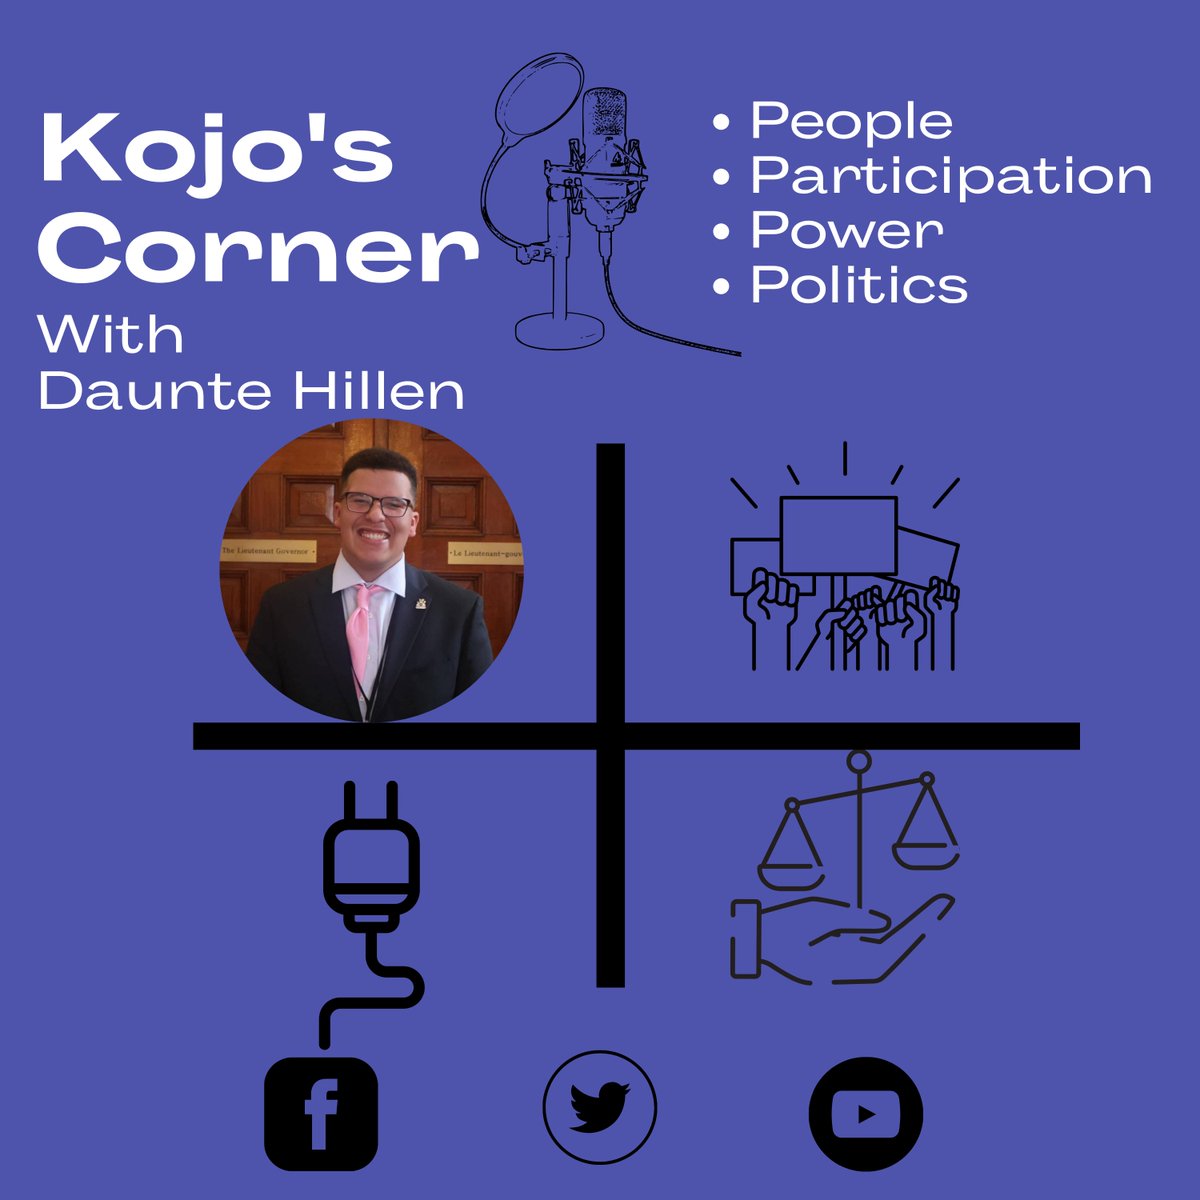 We are all set for tonight. We are talking with Daunte Hillen
✅Ontario Legislature Page Program
✅ Mental Health 
✅Model Parliament
✅ Indigenous Student Trustees 

Join the discussion on X or Youtube
#HamOnt #KojosCorner #onpoli 

youtube.com/live/mLTigymo6…